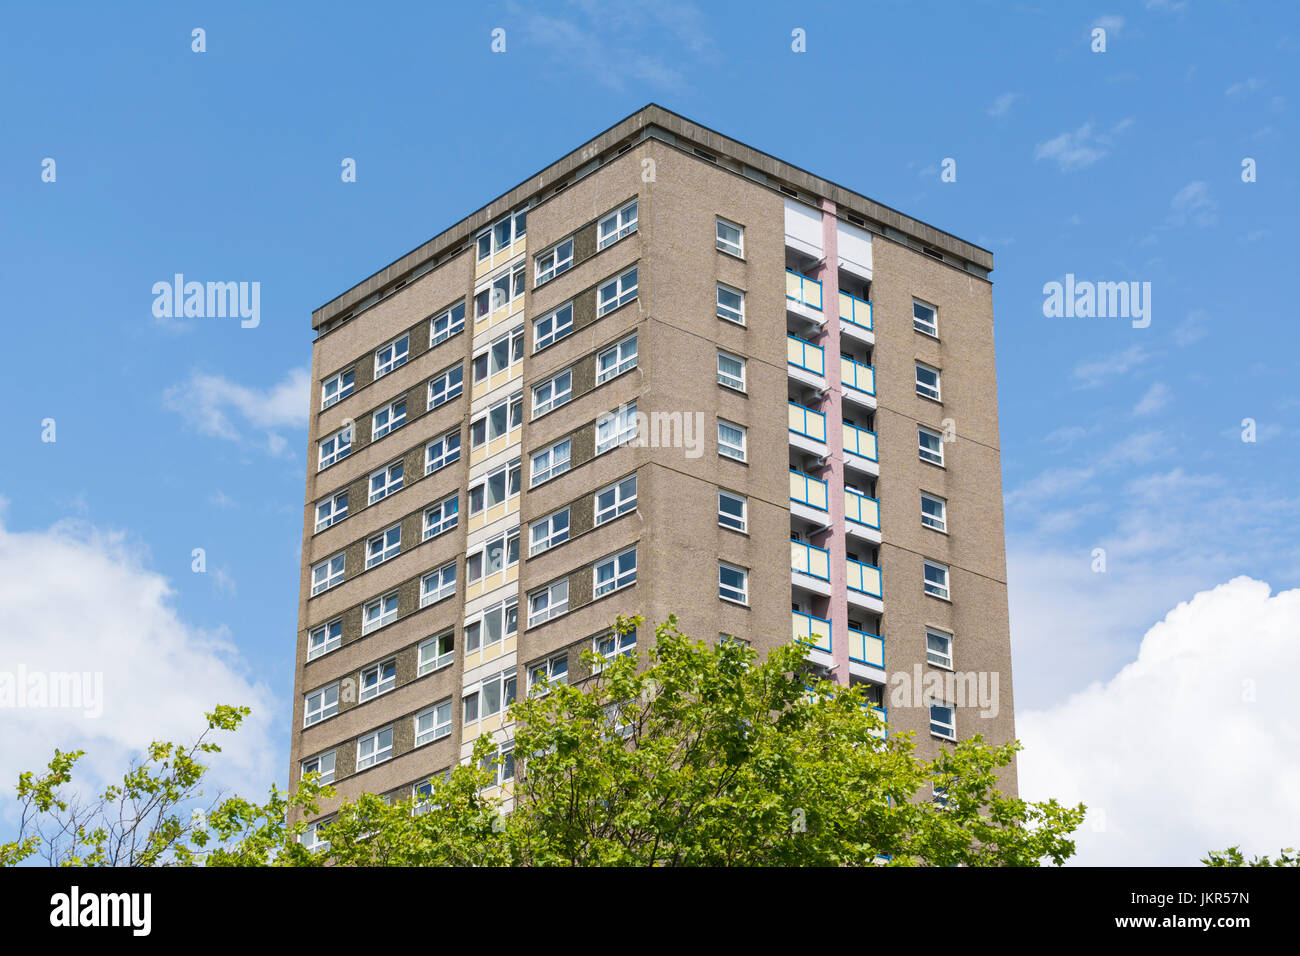 Modern high rise block of flats in the South of England, UK. Stock Photo